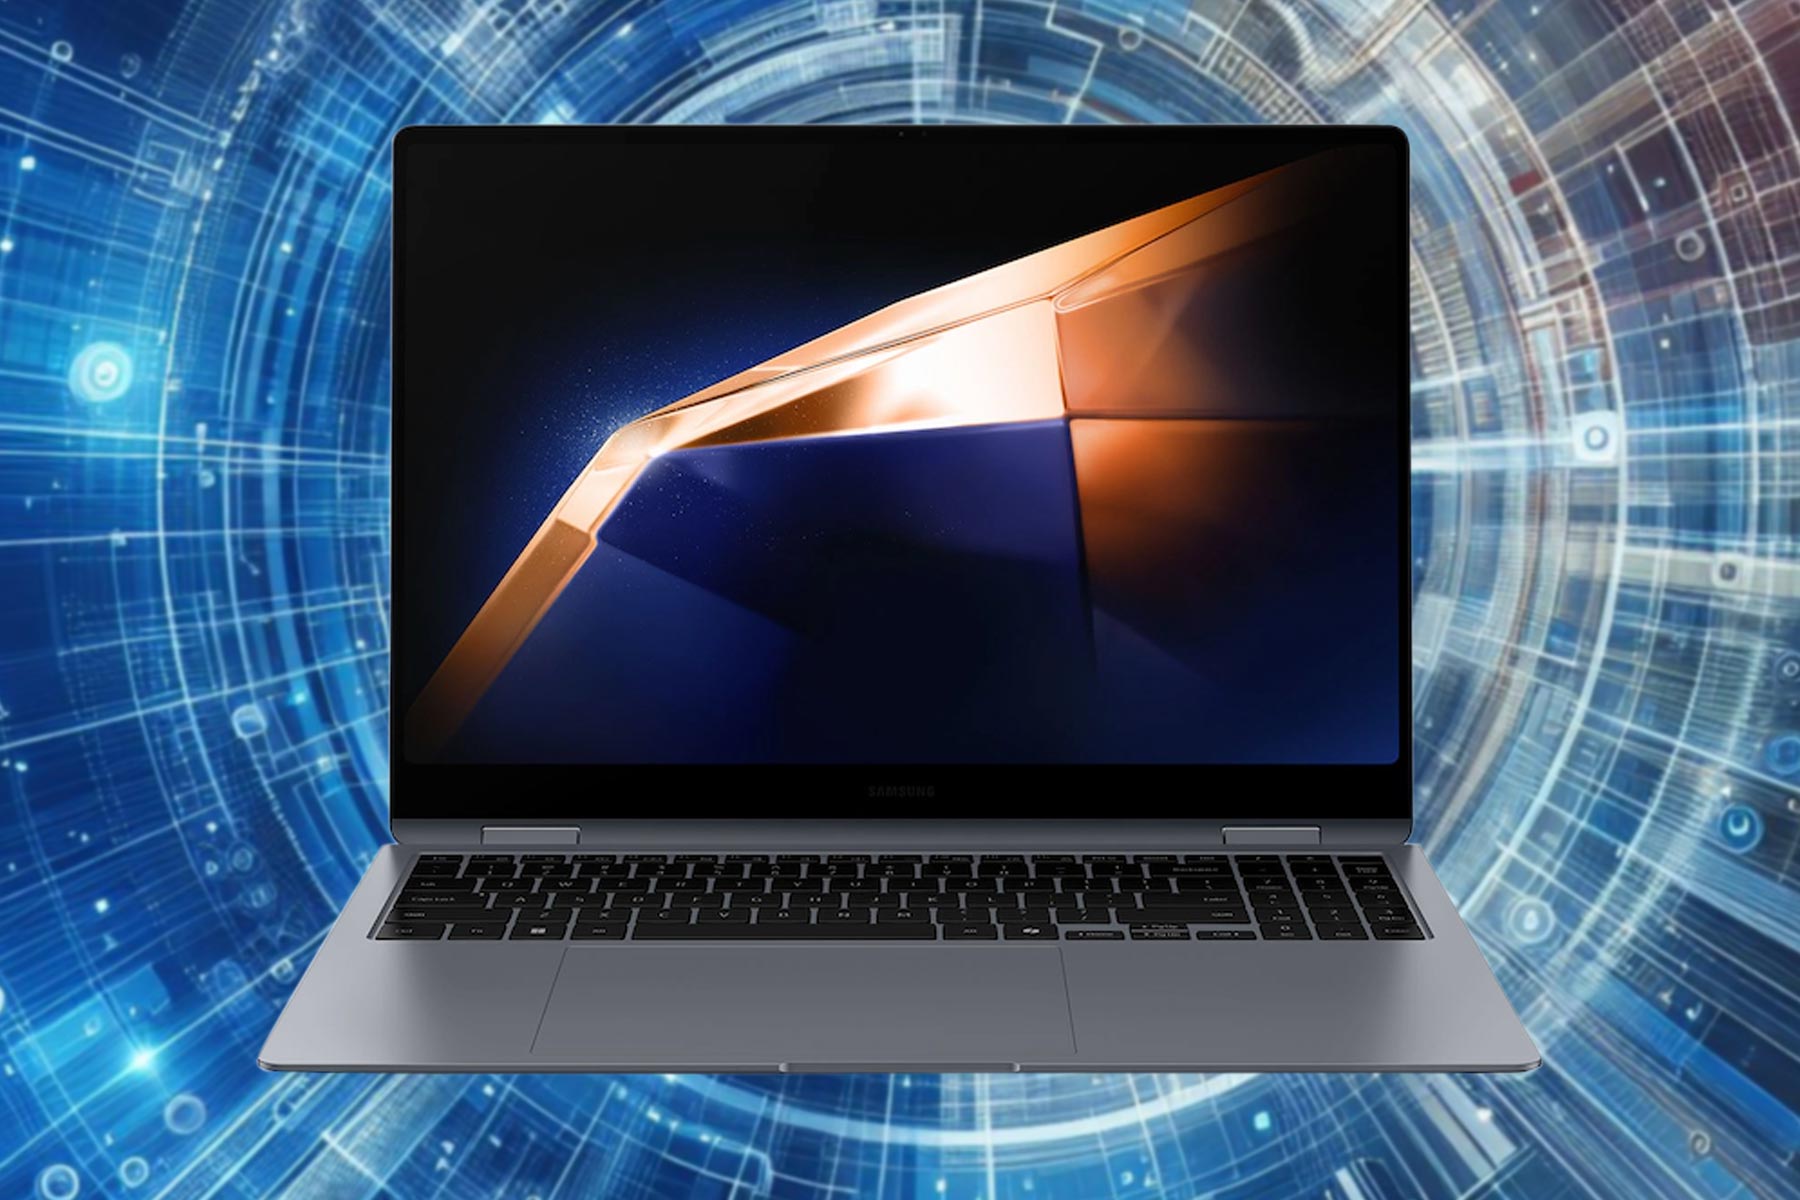 16″ of awesomeness: Samsung’s Galaxy Book4 Pro 360 is now less than $1500